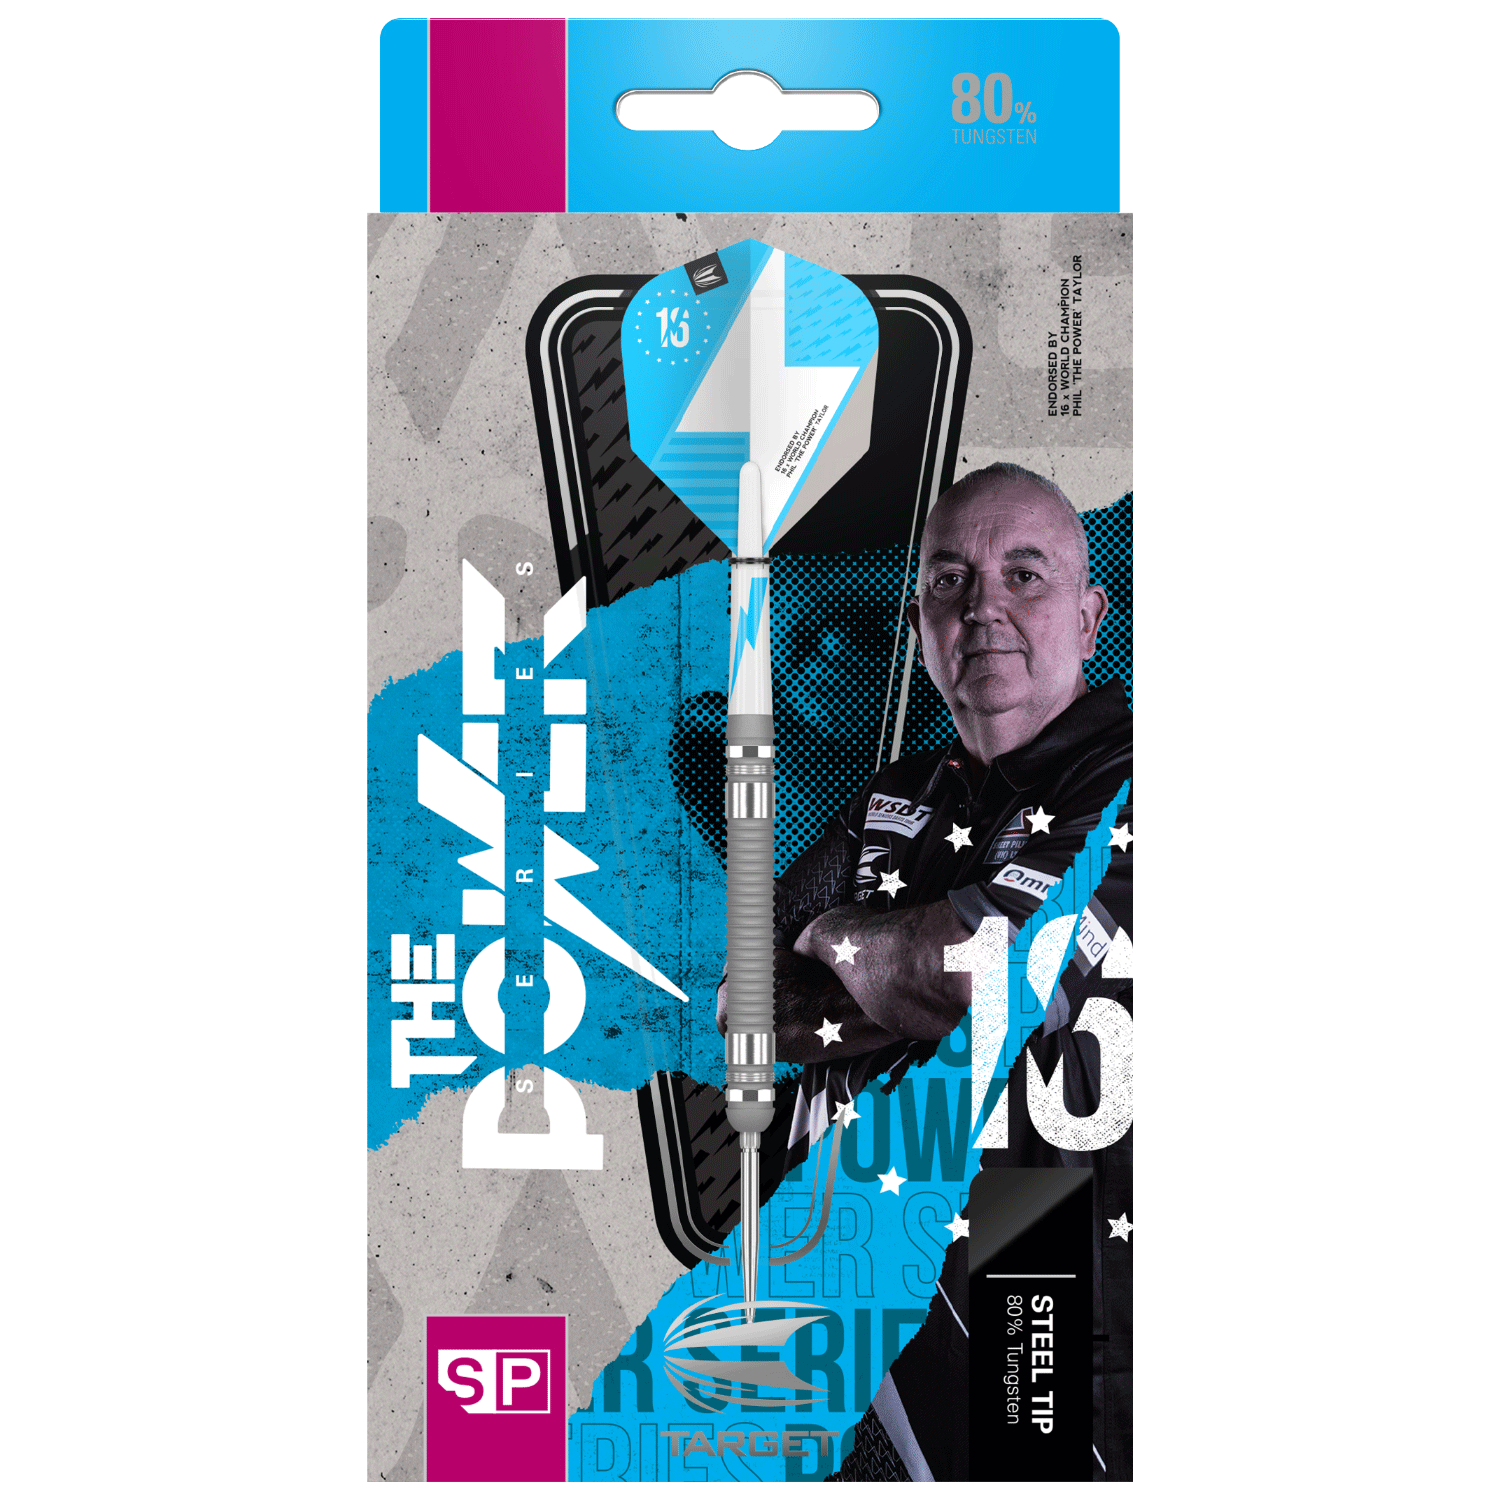 Target Phil Taylor The Power Series 80% Silver SP Steeldarts